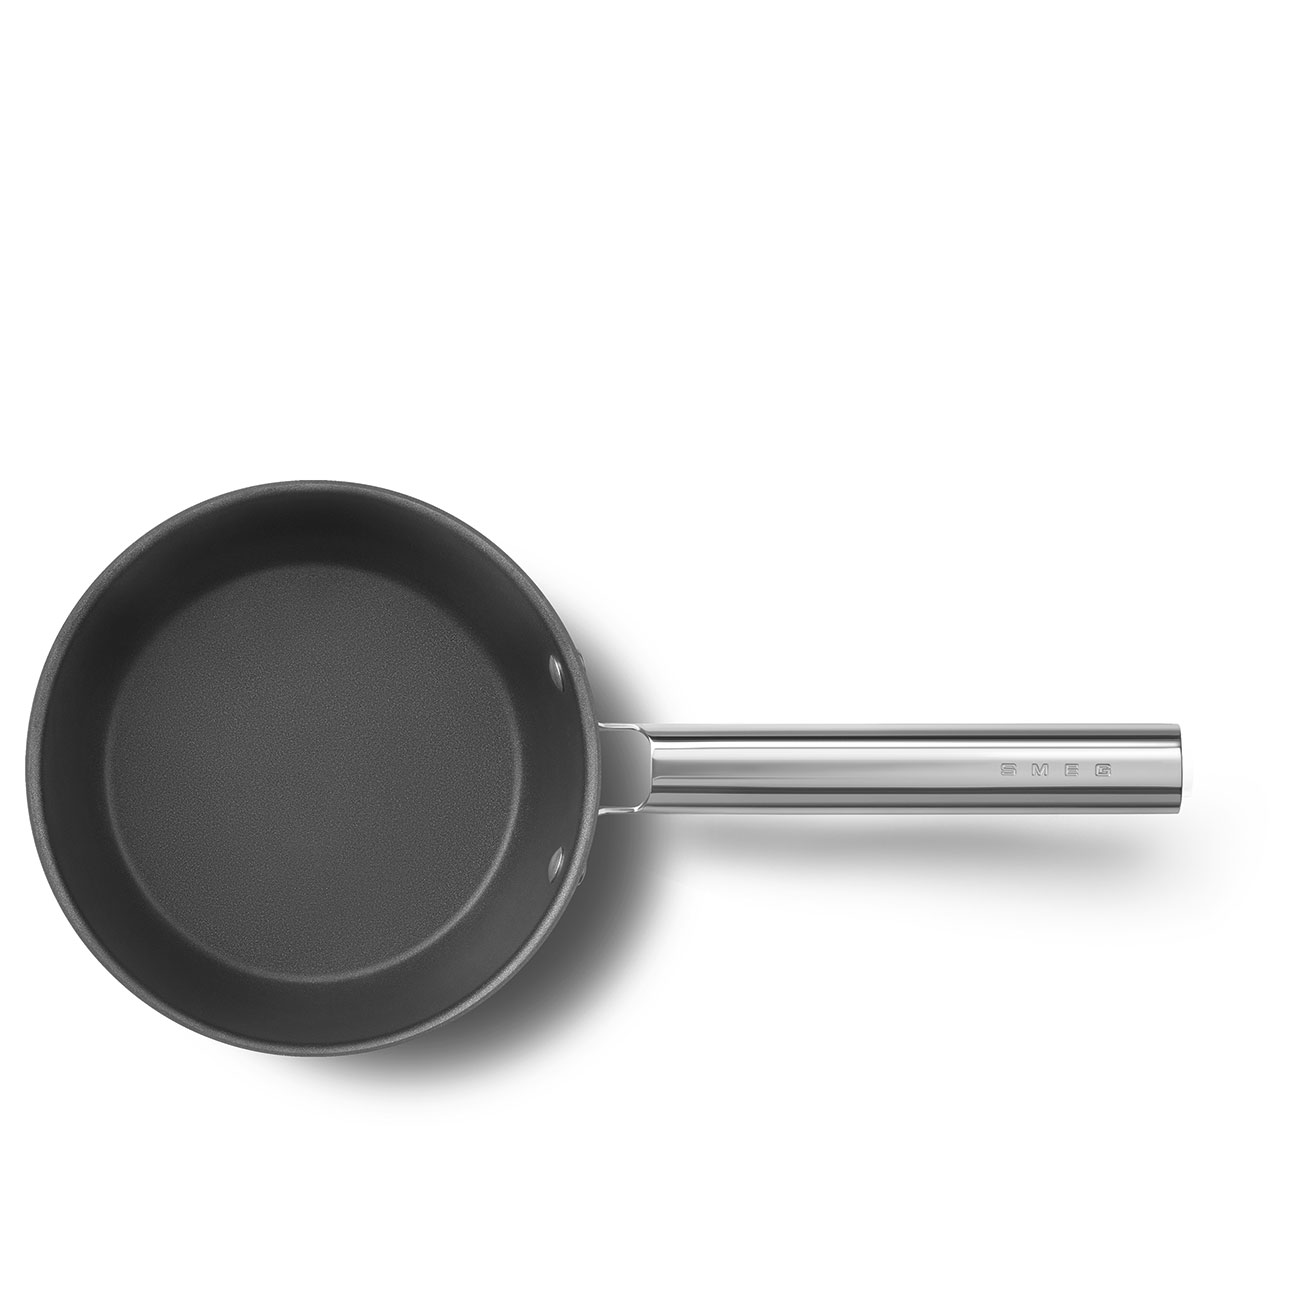 Smeg Black Non-stick Saucepan with glass lid and stainless steel handle_11